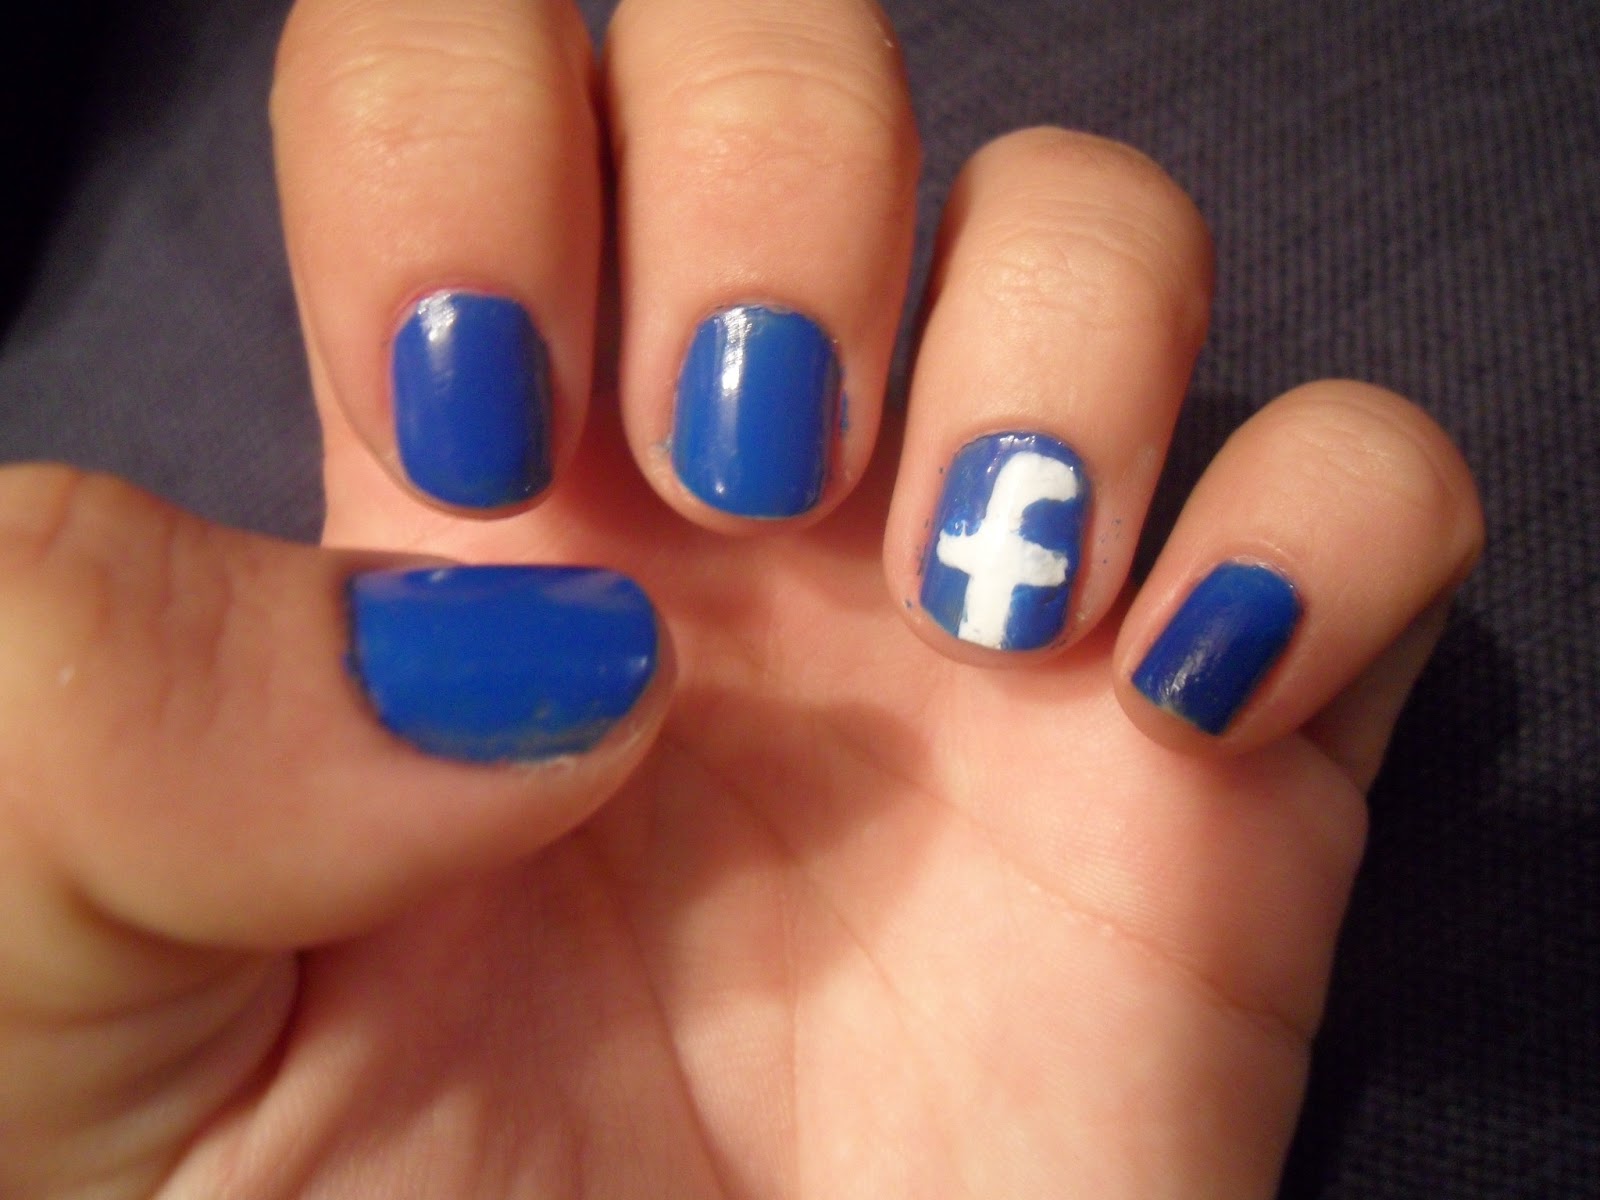 8. The Sisterhood of Nail Art: A Facebook Group for Nail Art Enthusiasts - wide 1